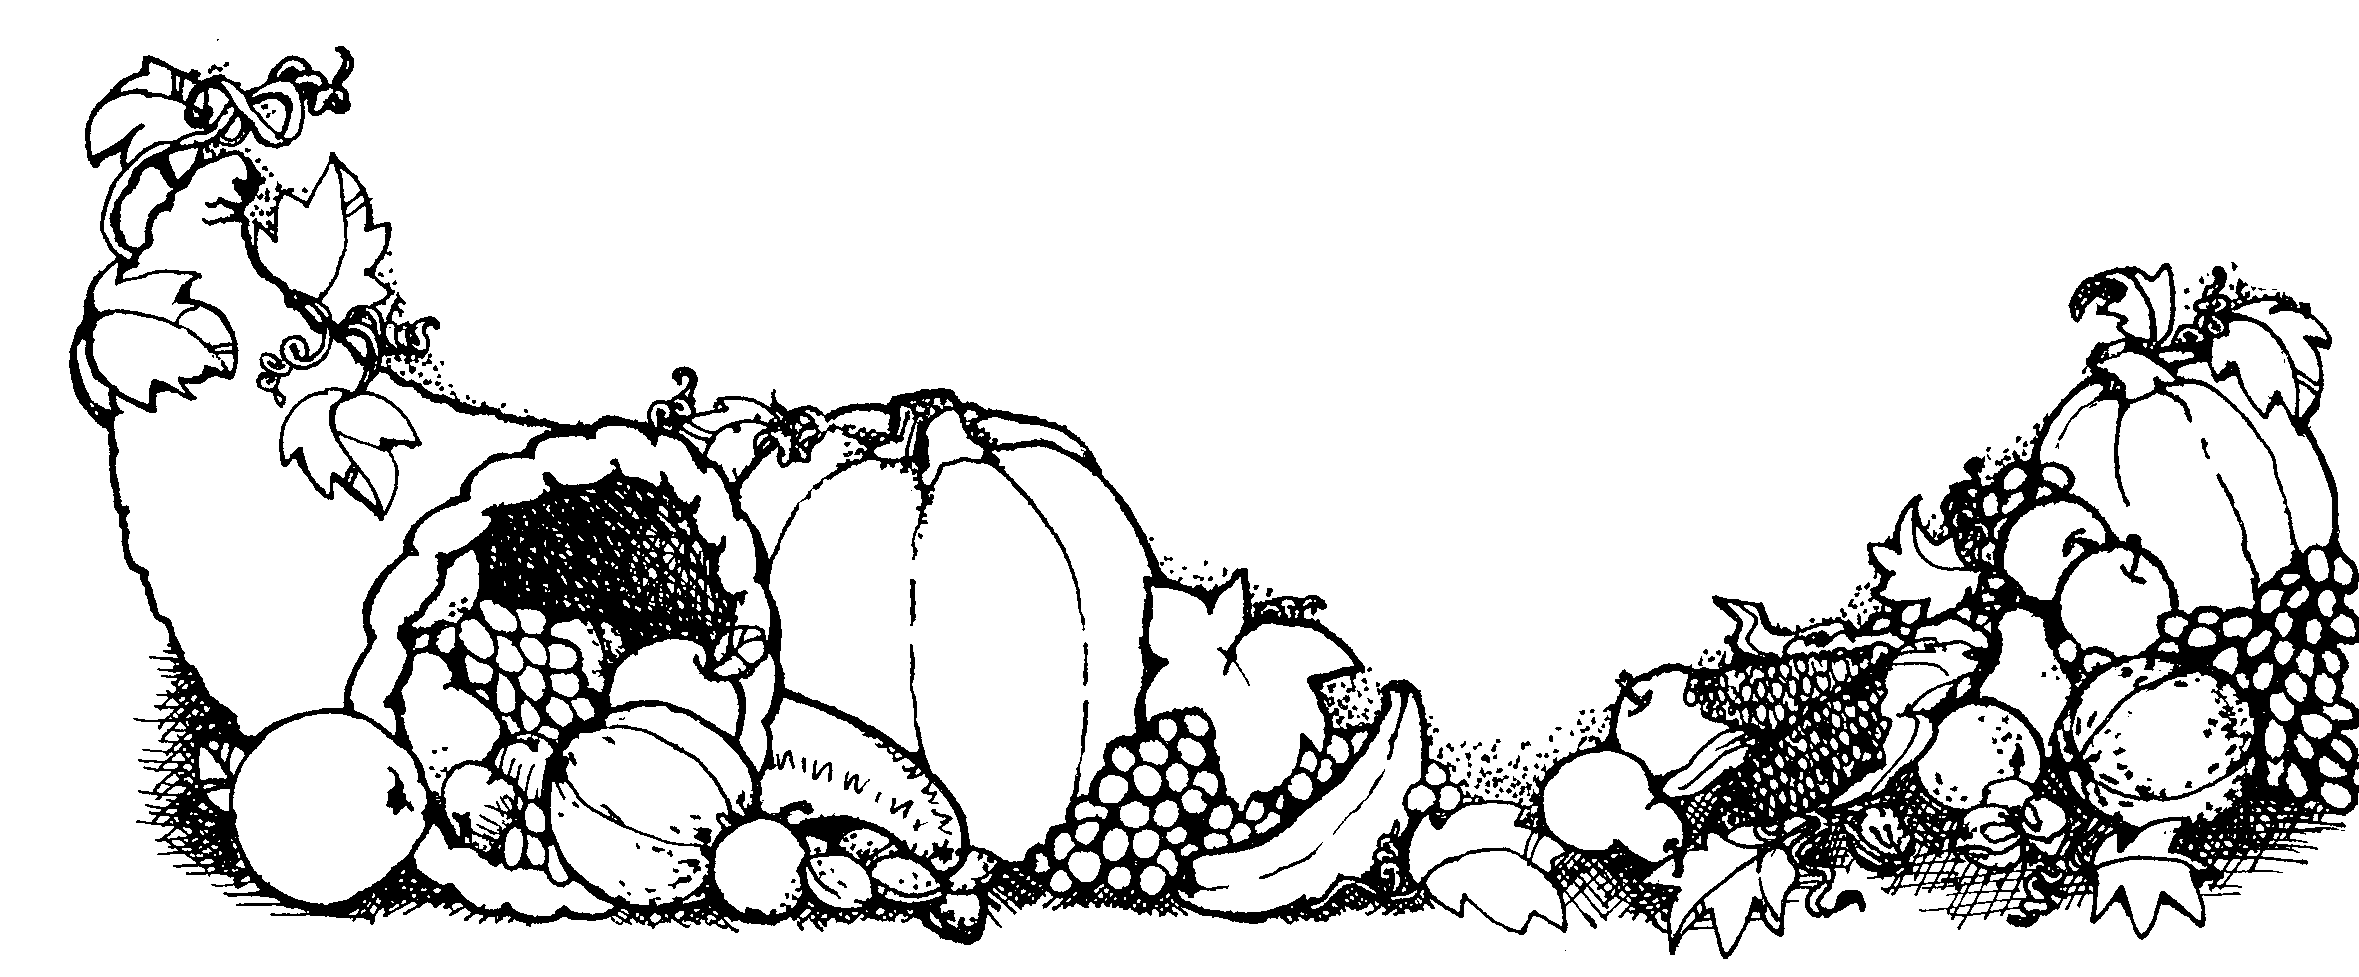 free black and white harvest clipart - photo #4